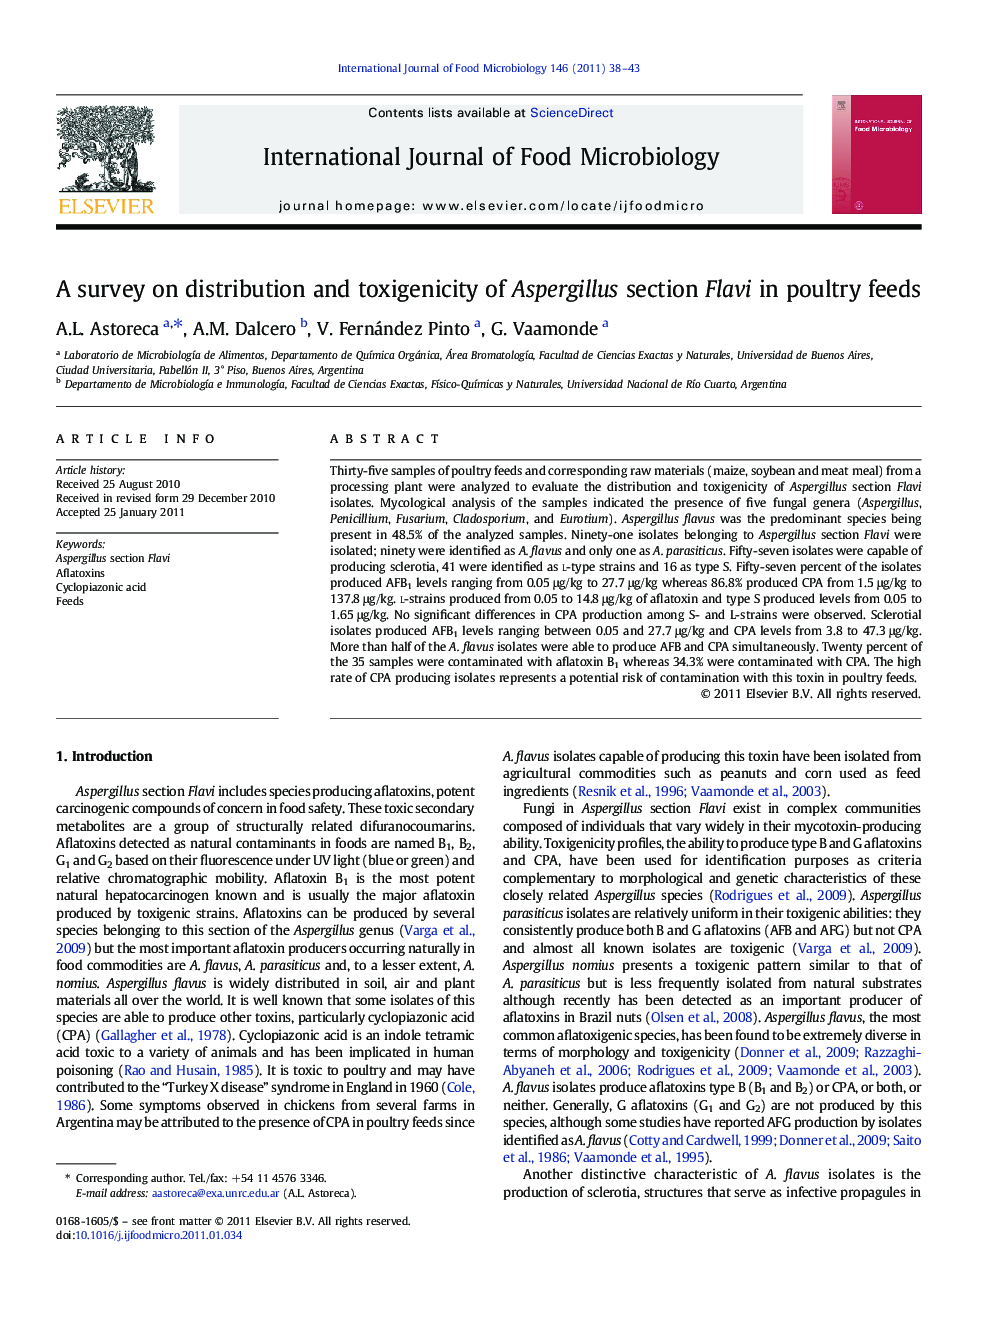 A survey on distribution and toxigenicity of Aspergillus section Flavi in poultry feeds